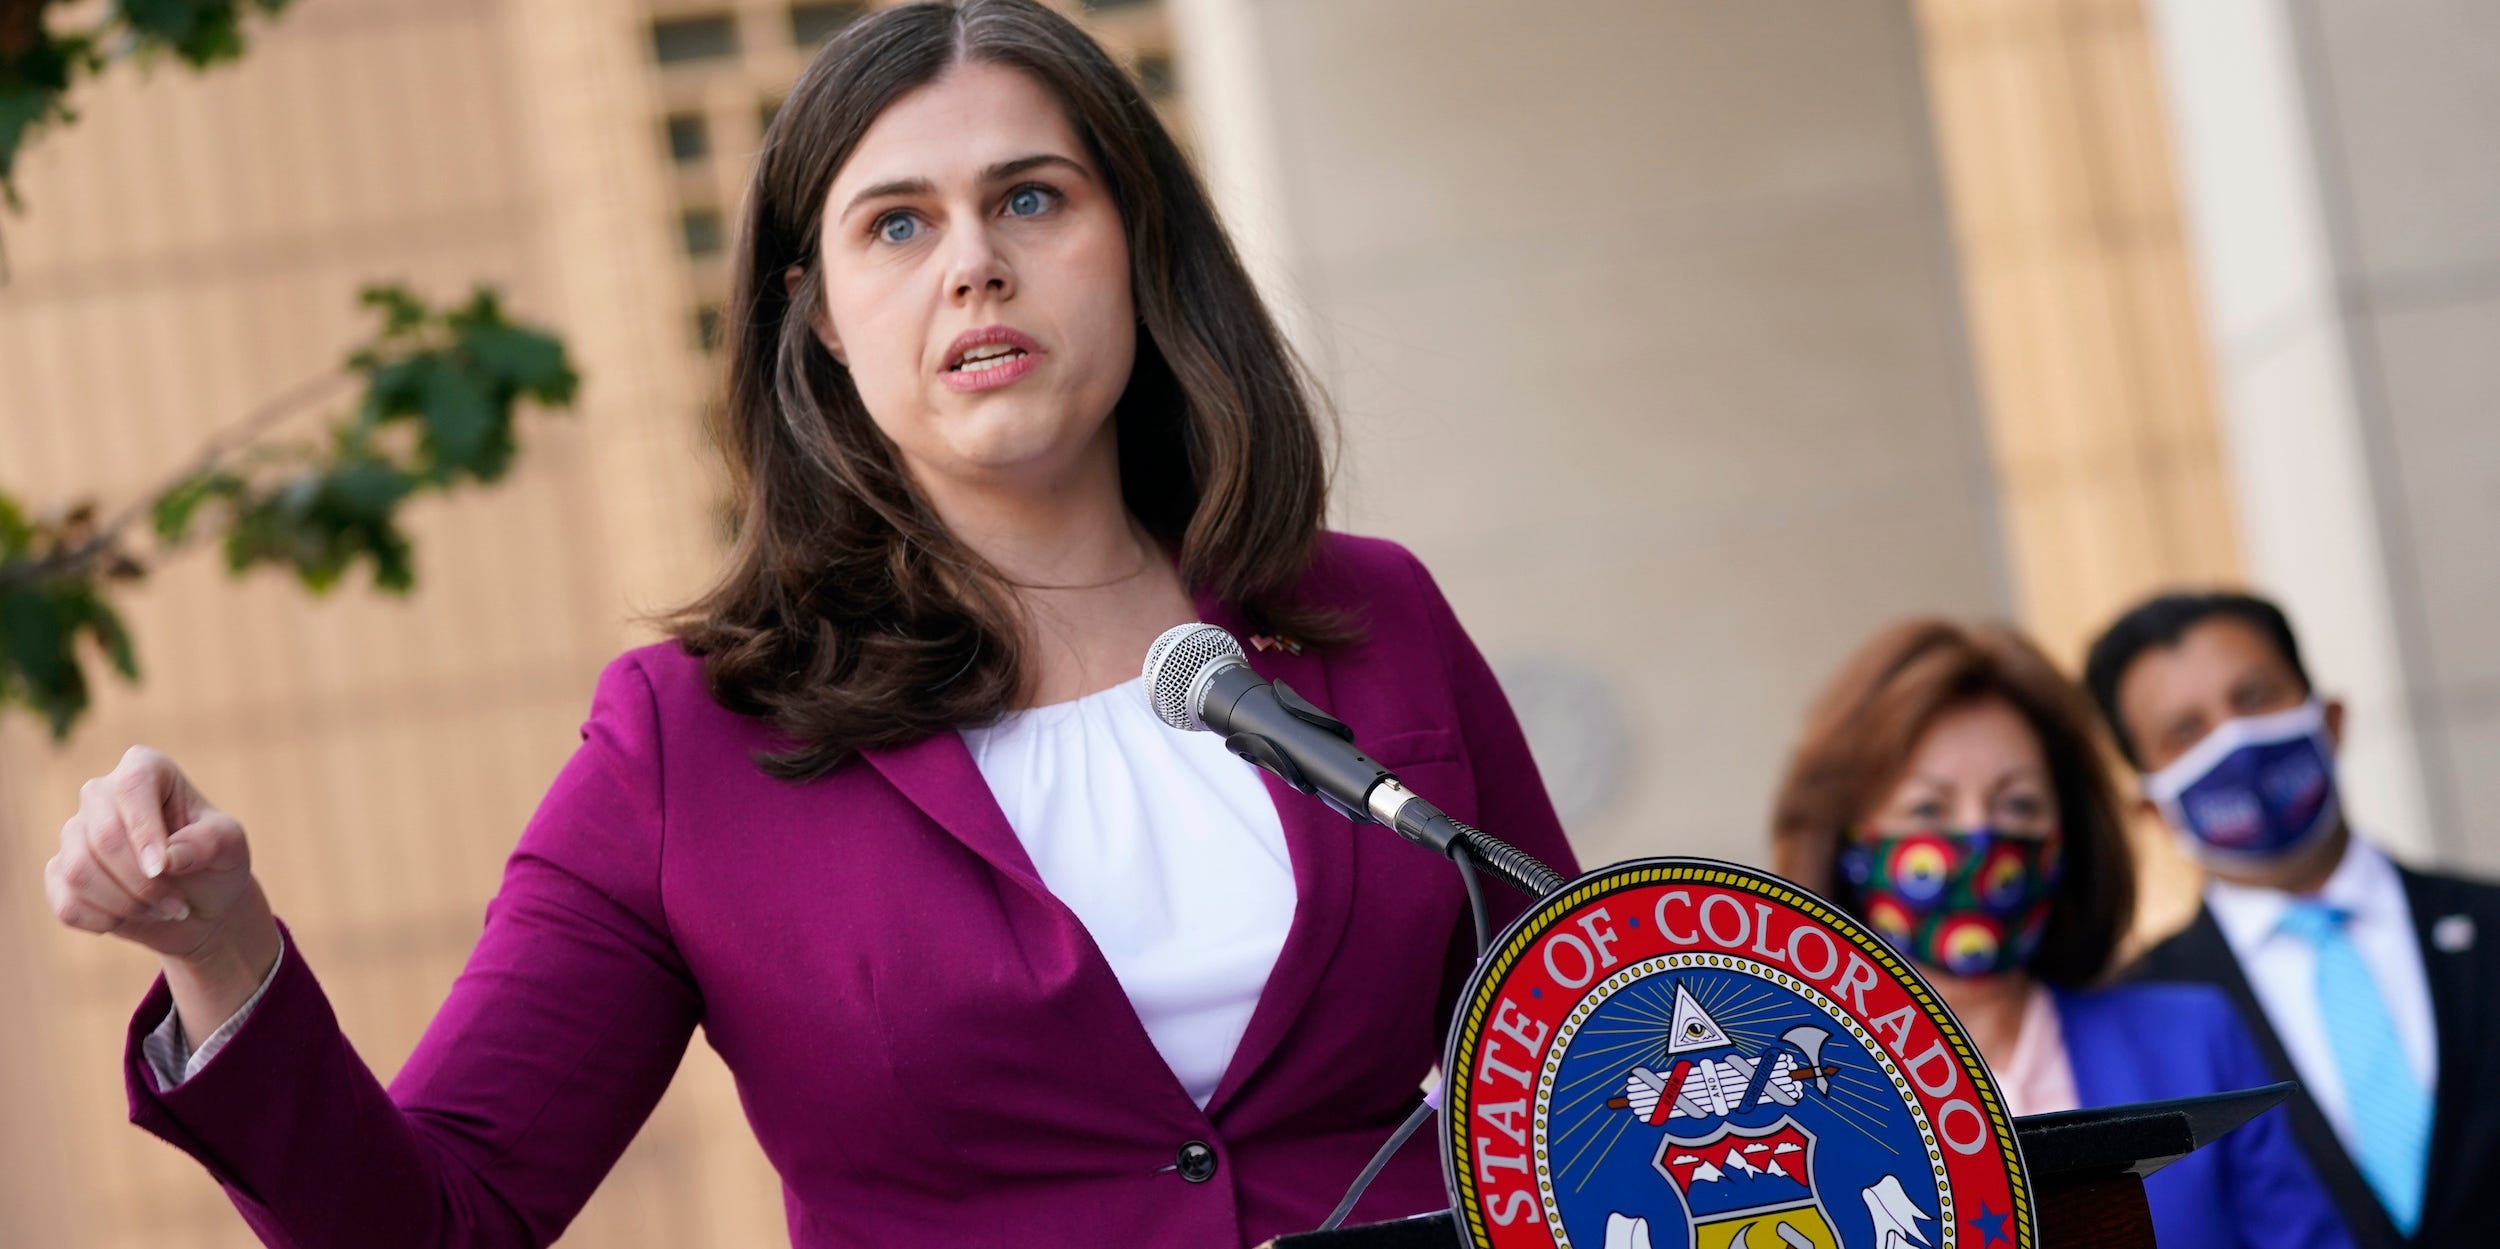 Colorado Secretary of State Jena Griswold makes a point during a news conference about the the state's efforts to protect the process of casting a vote in the general election Thursday, Oct. 15, 2020, in downtown Denver.